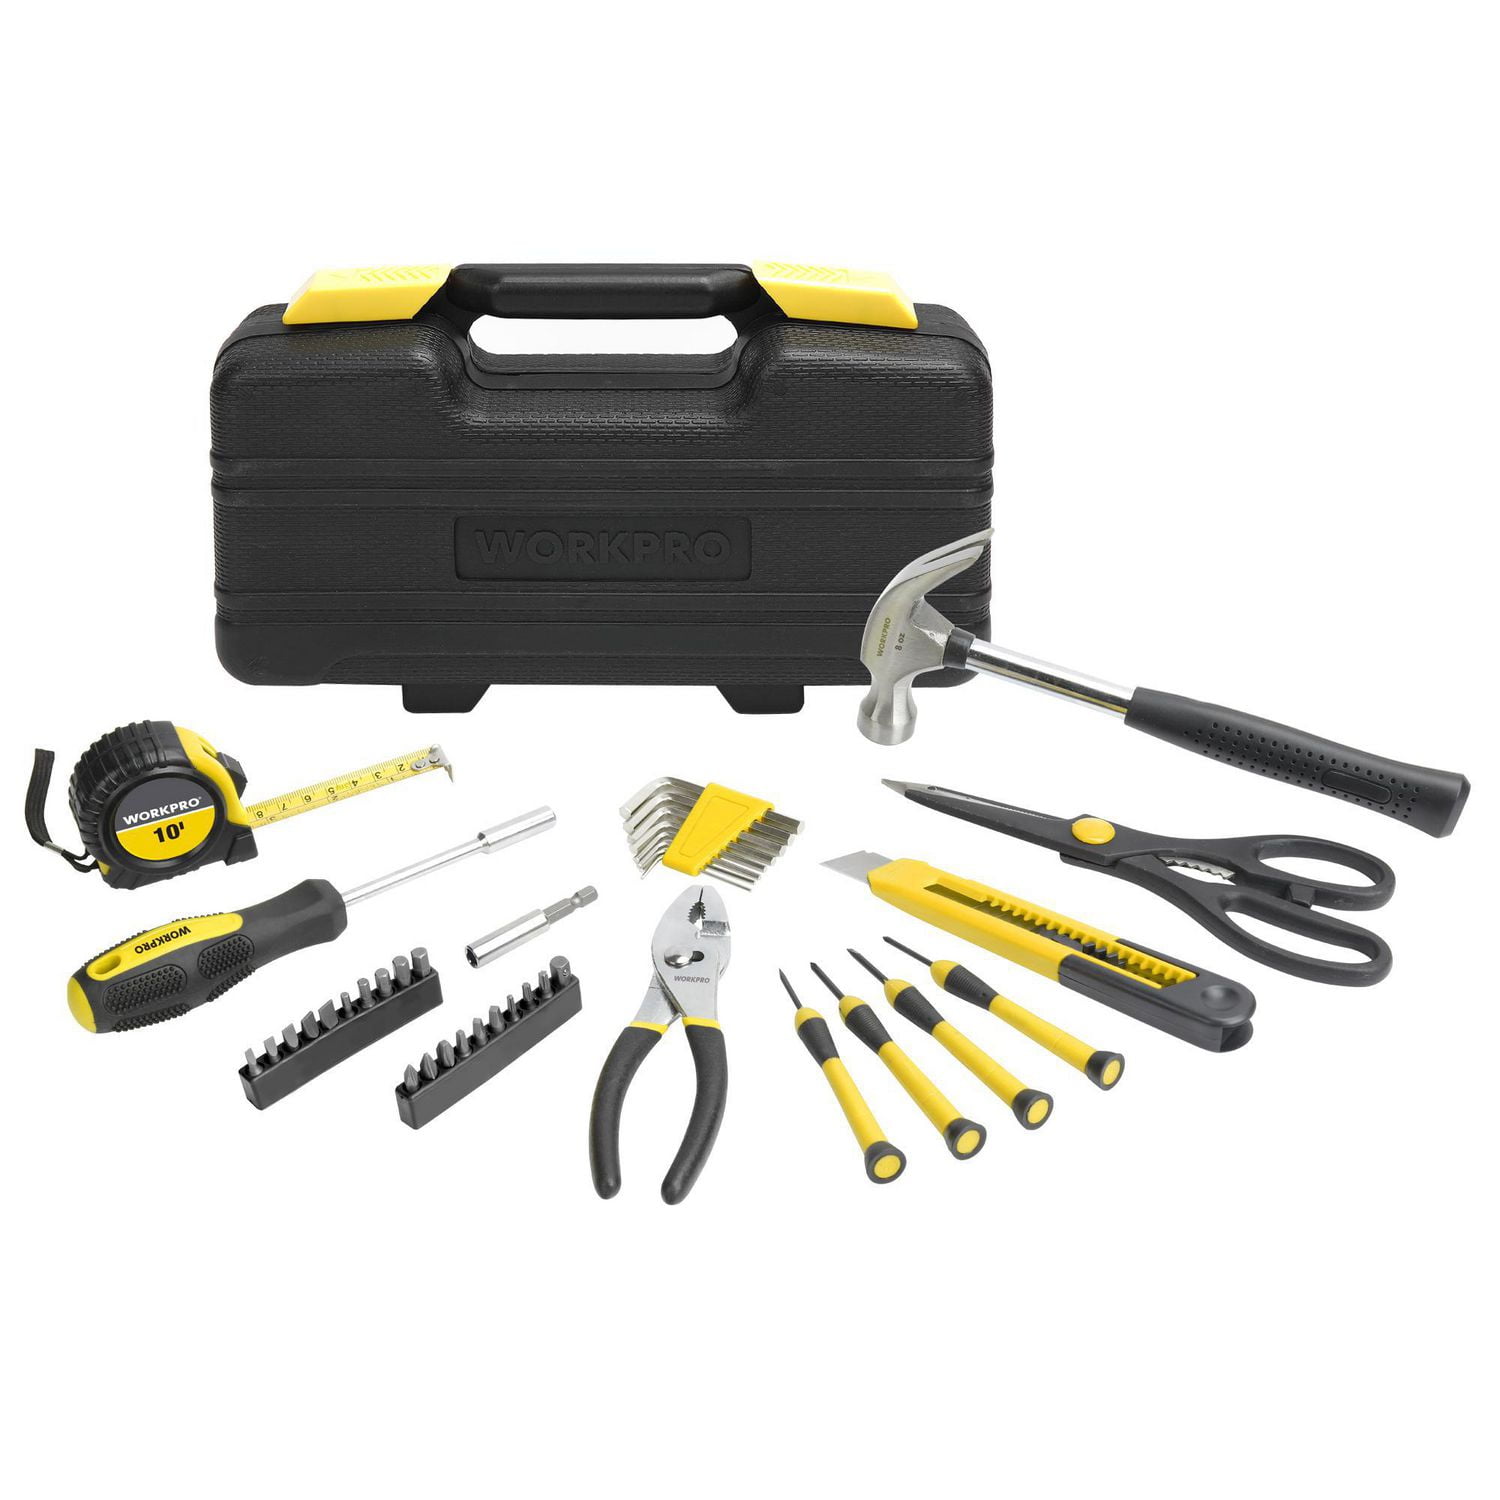 WorkPro Household Tool Kit-40 Piece, SAE & MM 